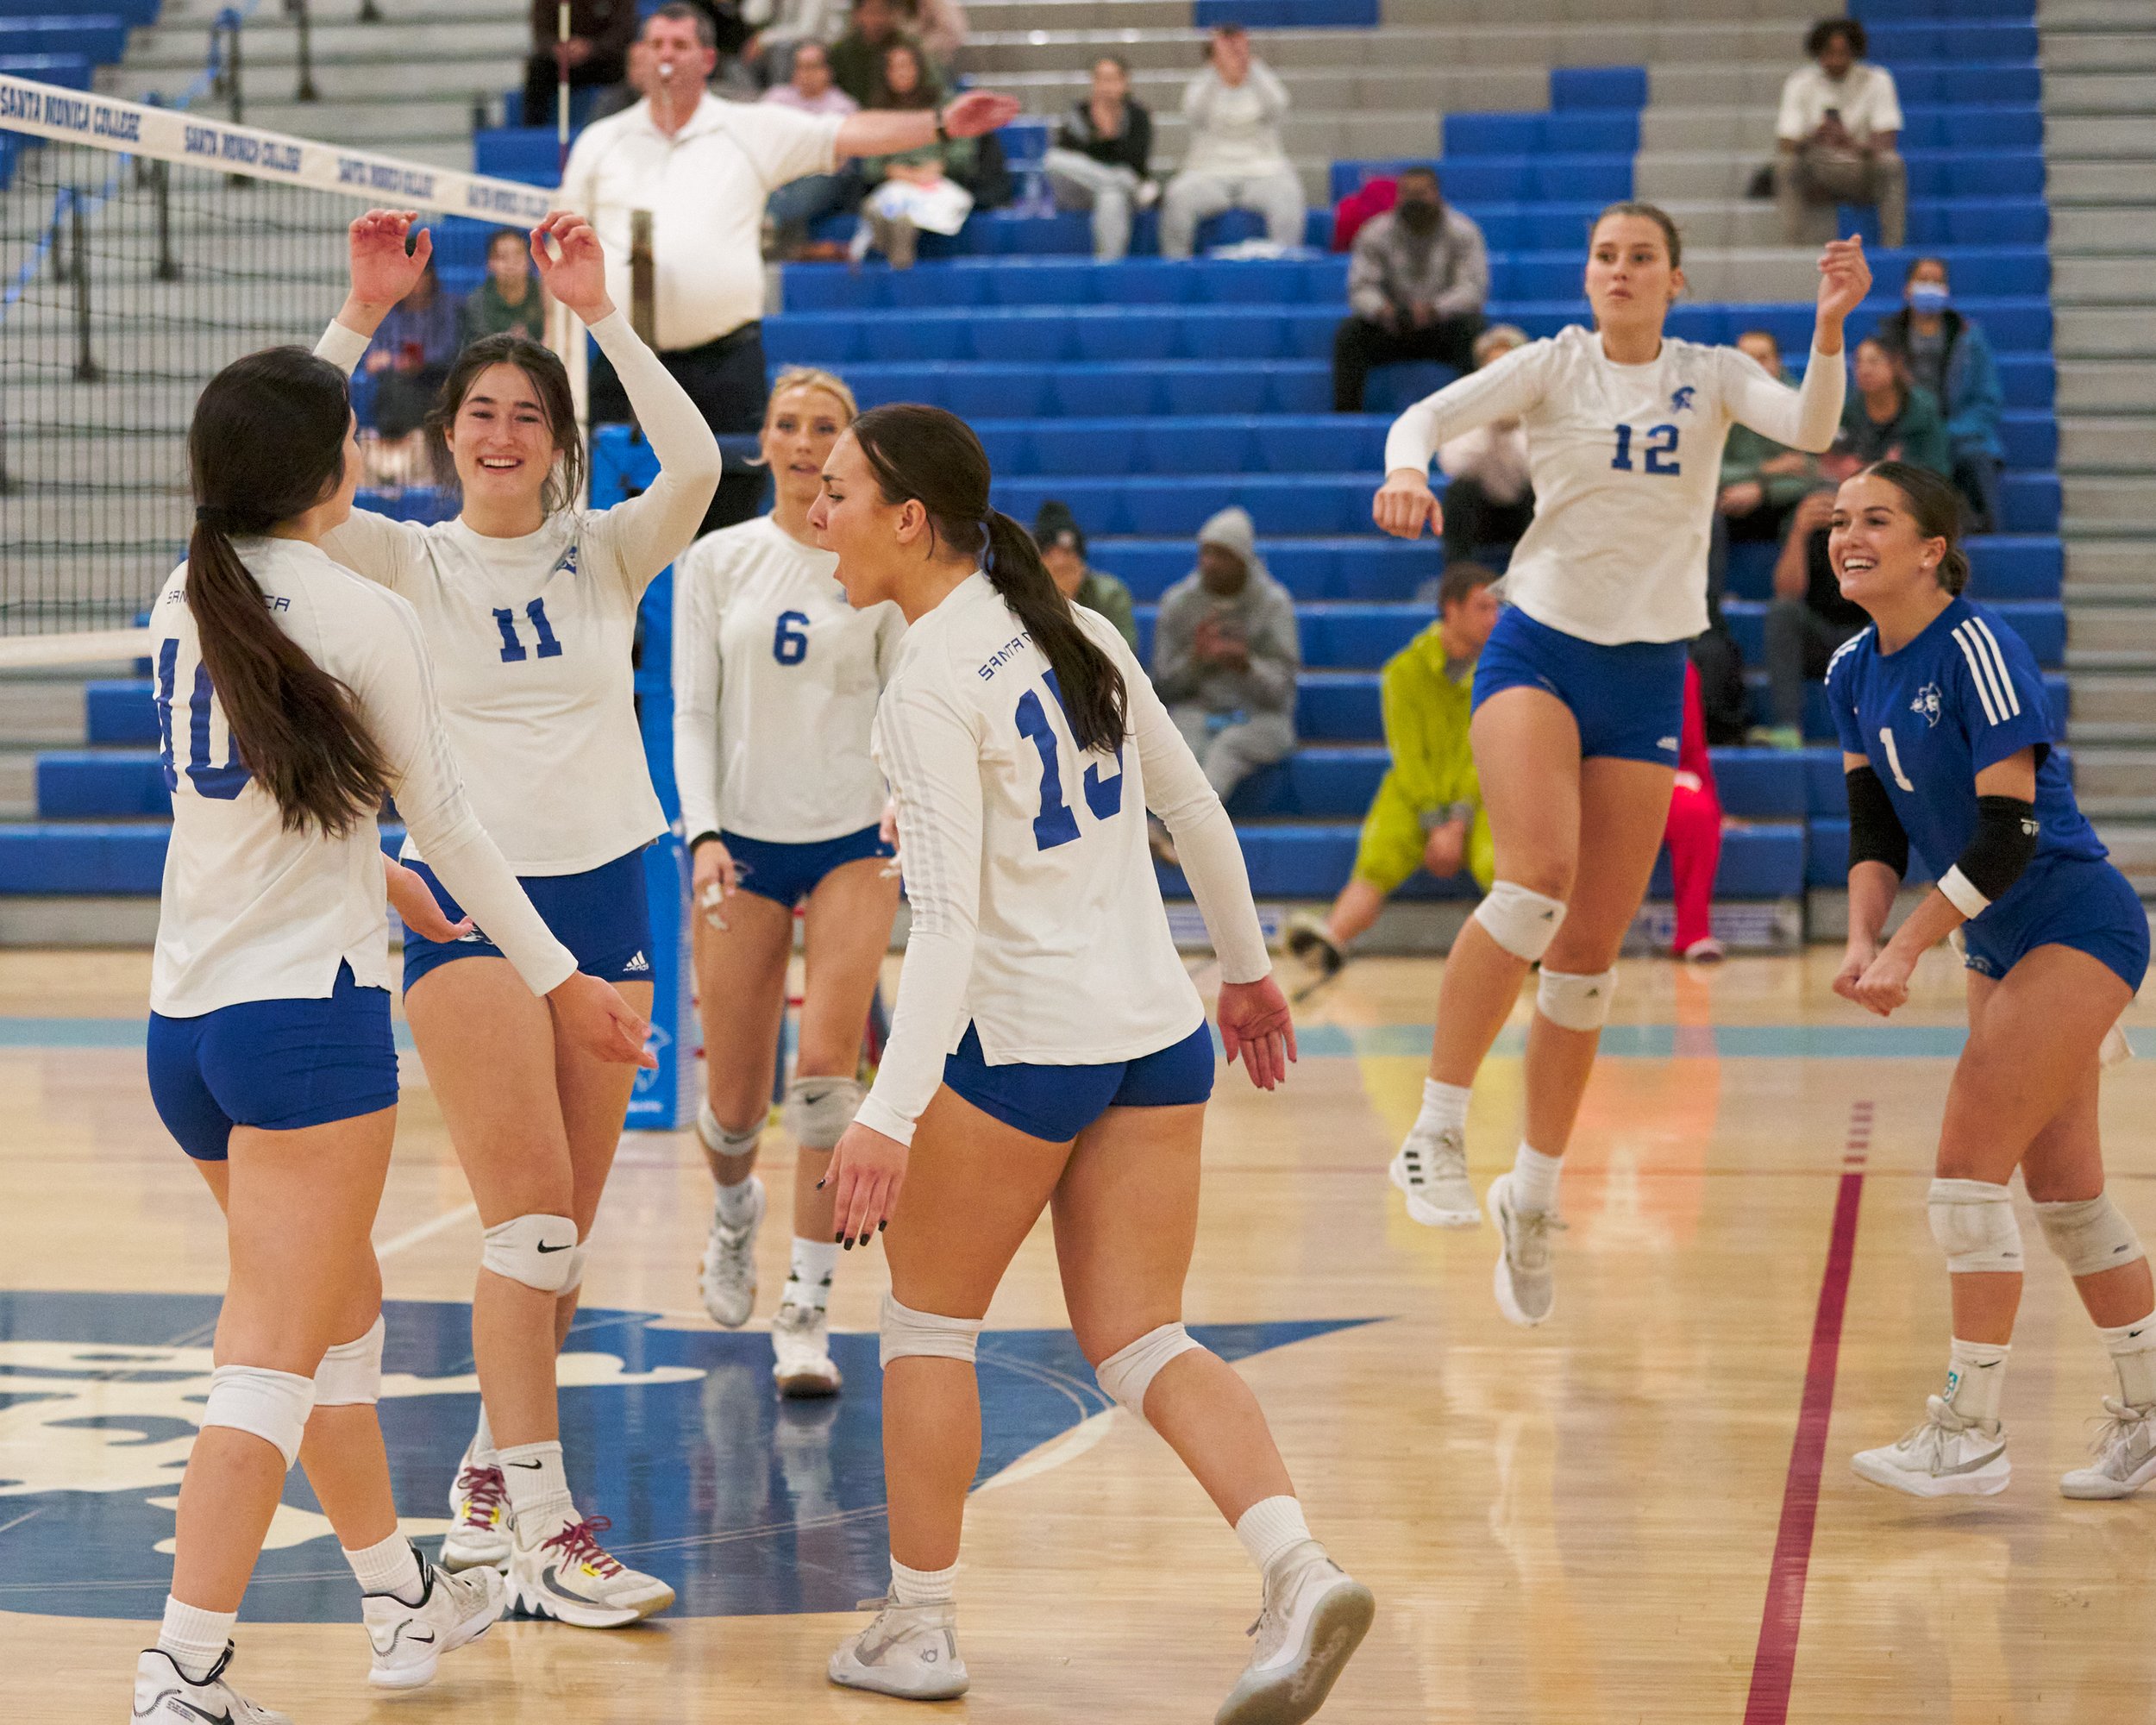  Santa Monica College Corsairs' Sophia Odle, Maiella Riva, Sophia Lawrance (6), Angelina Maheax, Mia Paulson, and Halle Anderson celebrate a kill by Odle during the women's volleyball match against the Glendale Community College Vaqueros on Wednesday